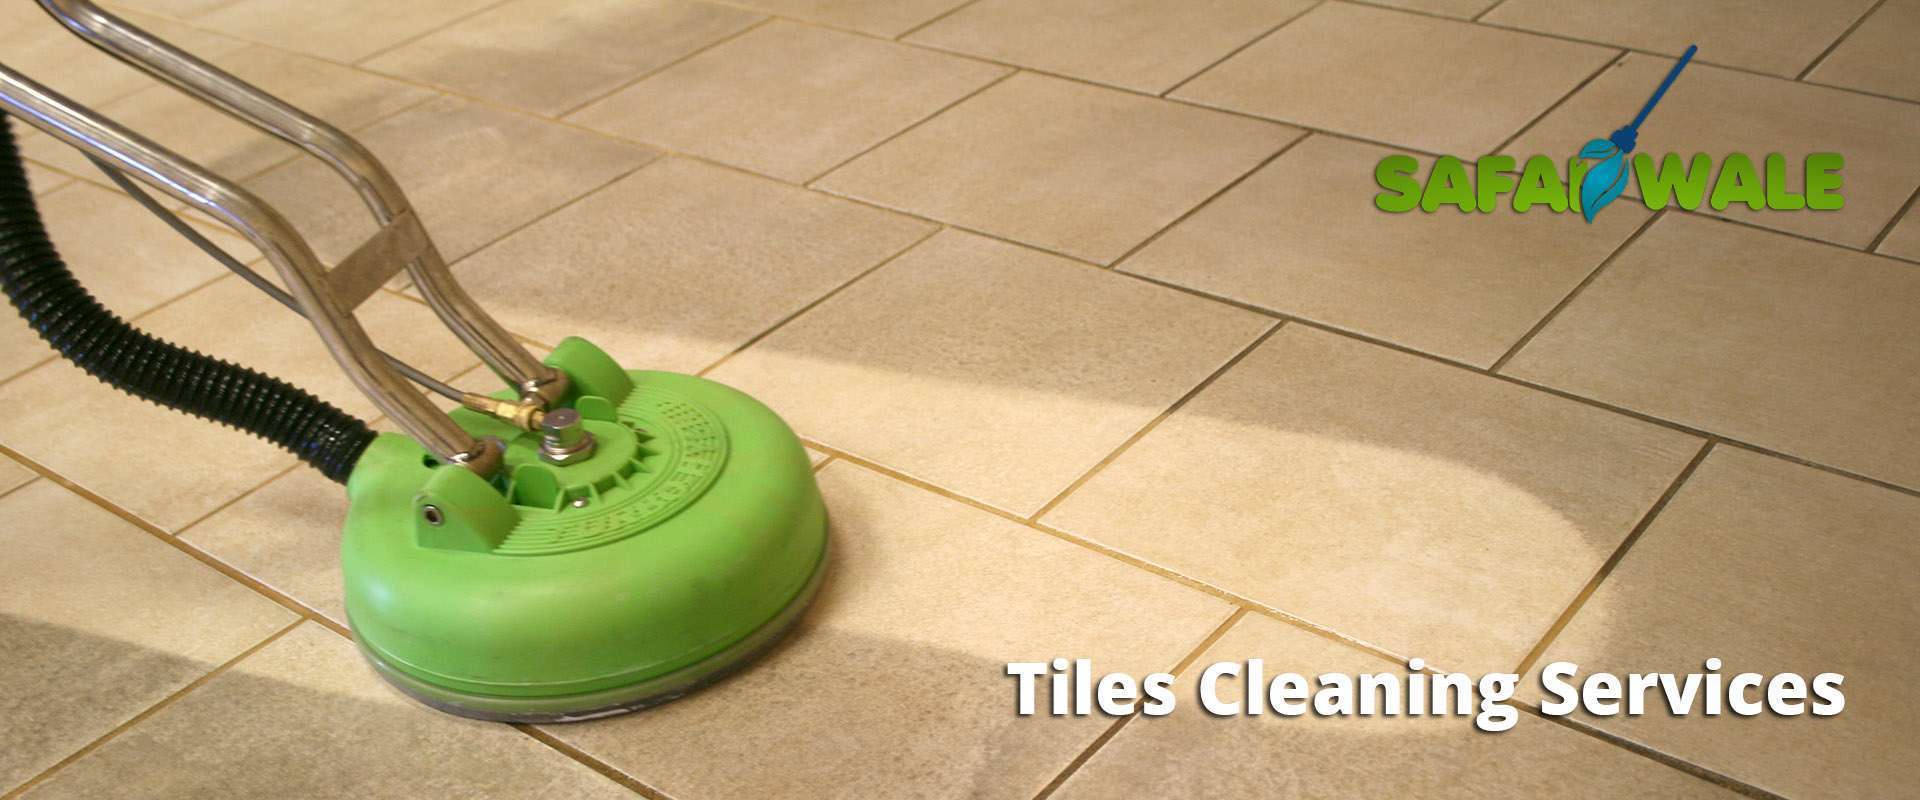 Tiles Cleaning Services Near Me